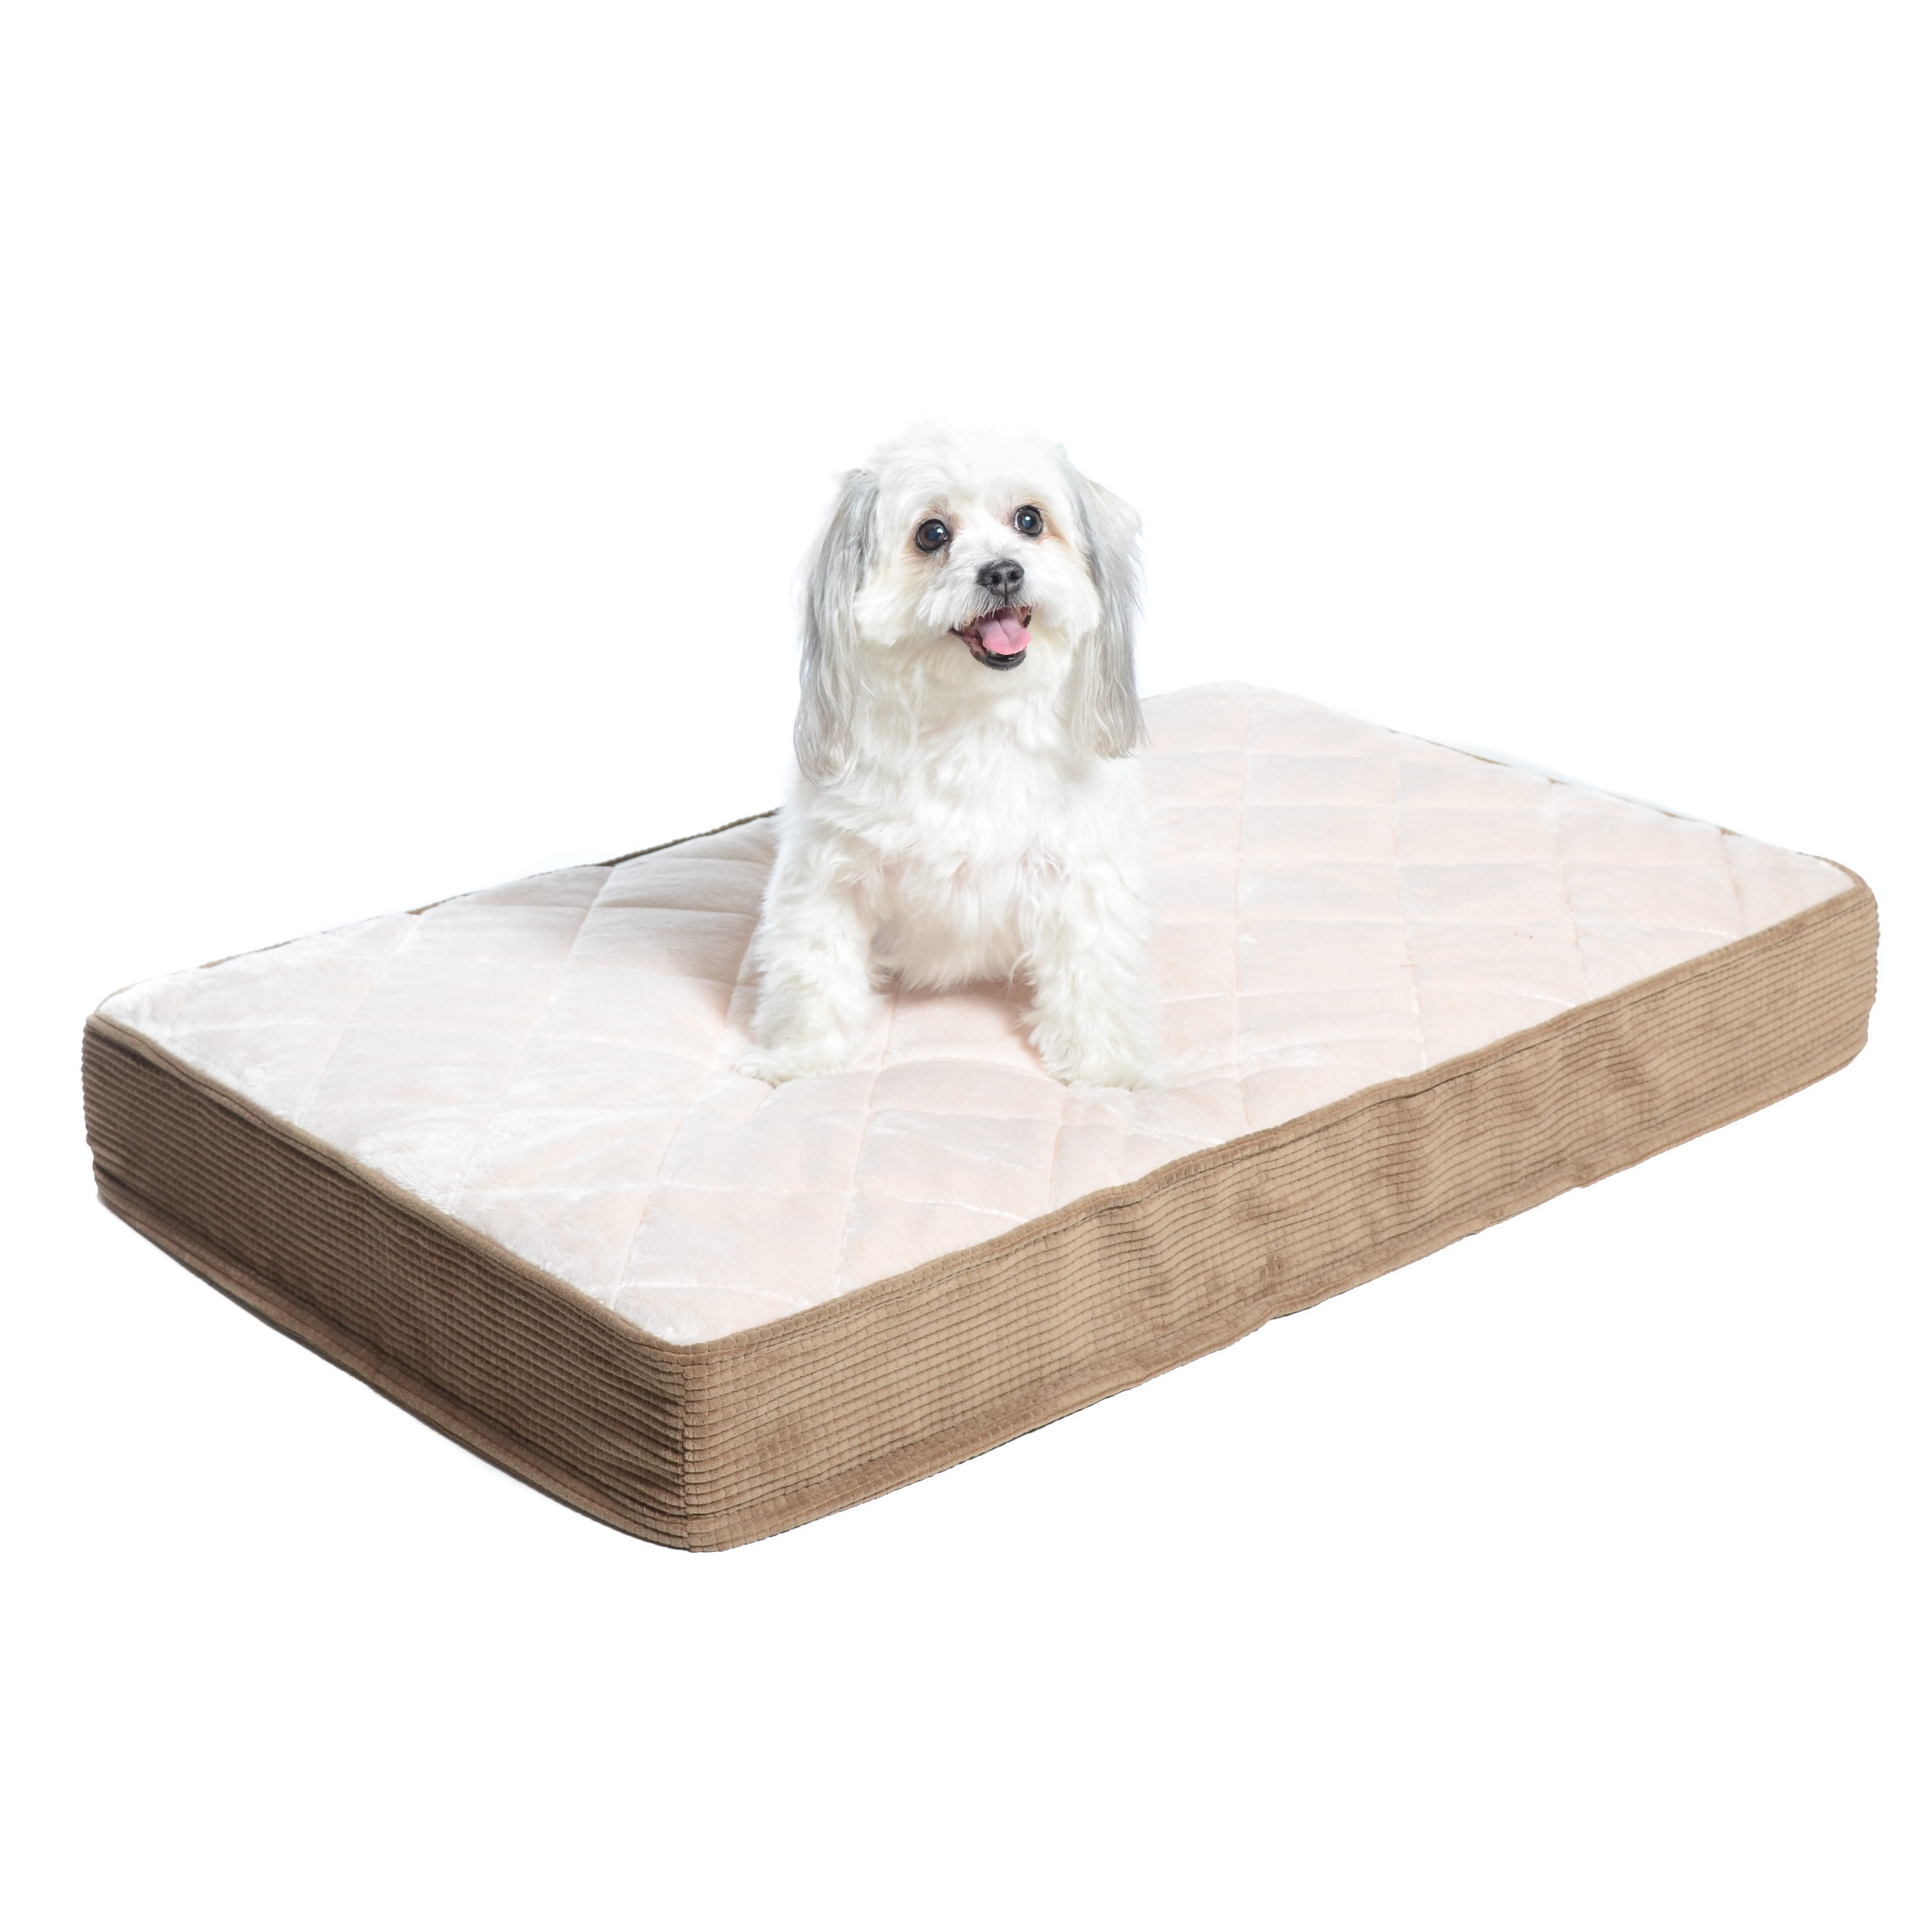 Milliard Quilted Padded Orthopedic Dog Bed, Egg Crate Foam with Plush Pillow Top Washable Cover (41 inches x 27 inches x 4 inches) - image 1 of 7